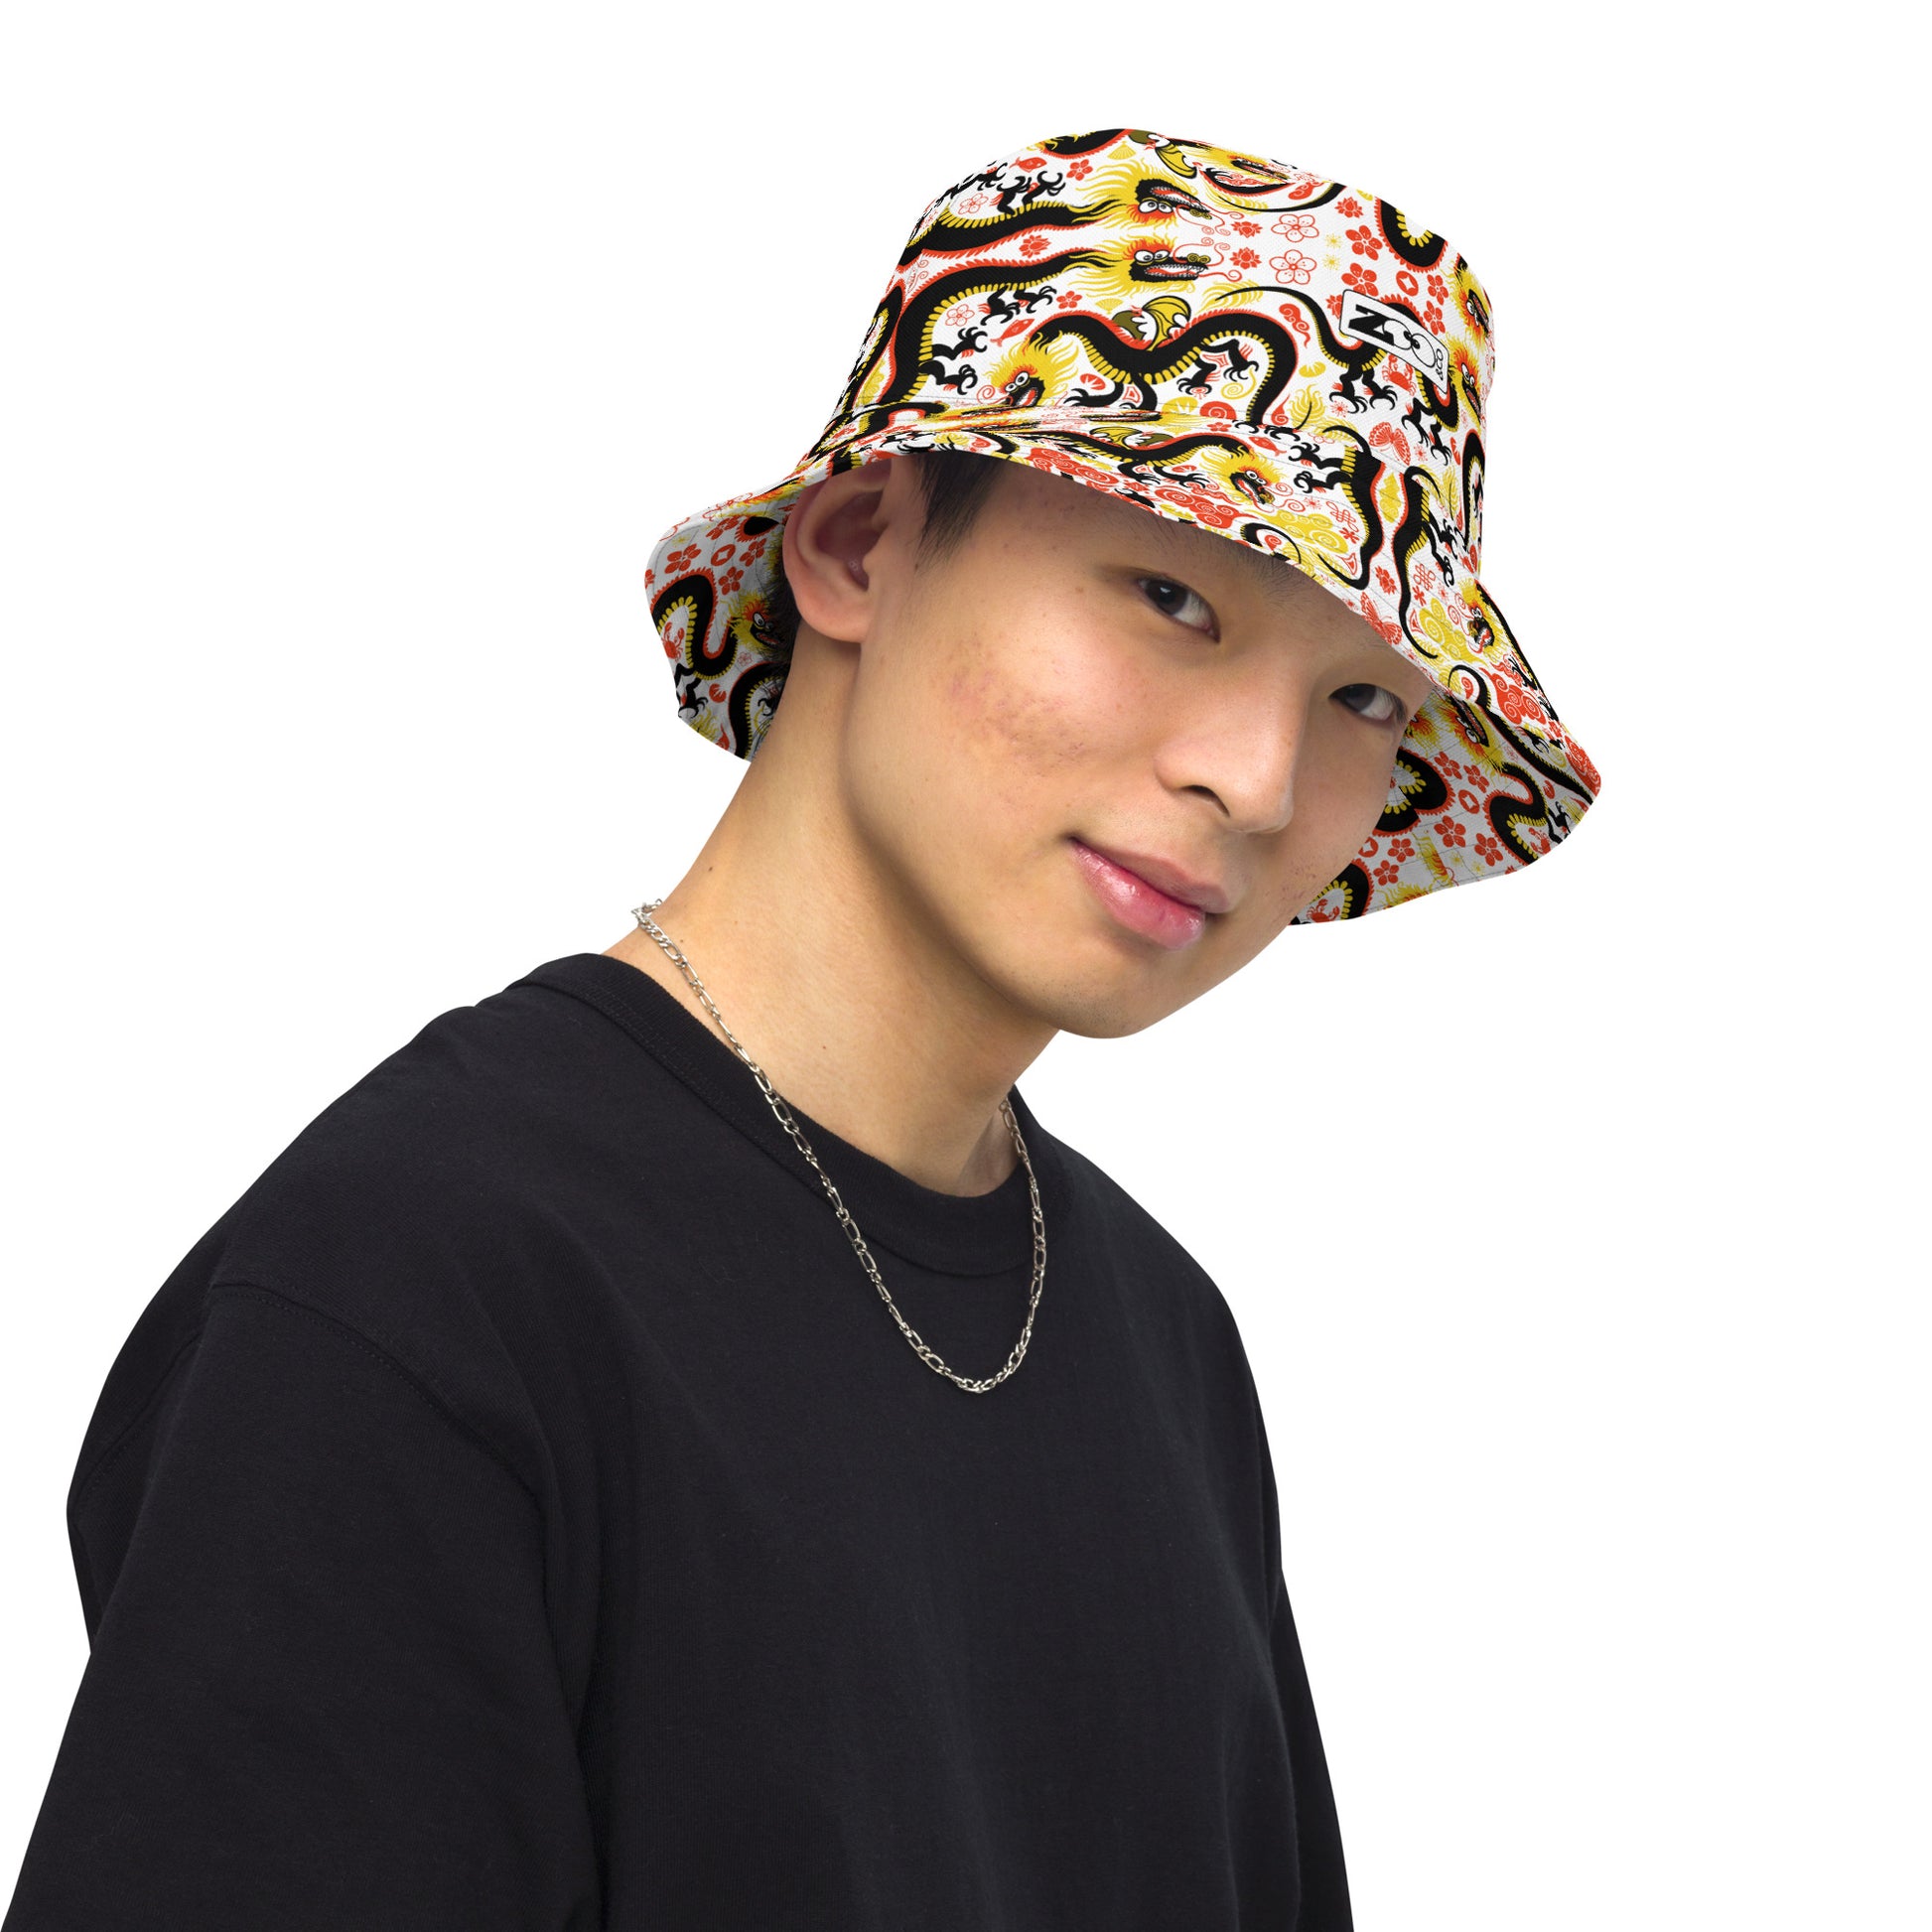 The powerful dark side of the doodle world Reversible bucket hat